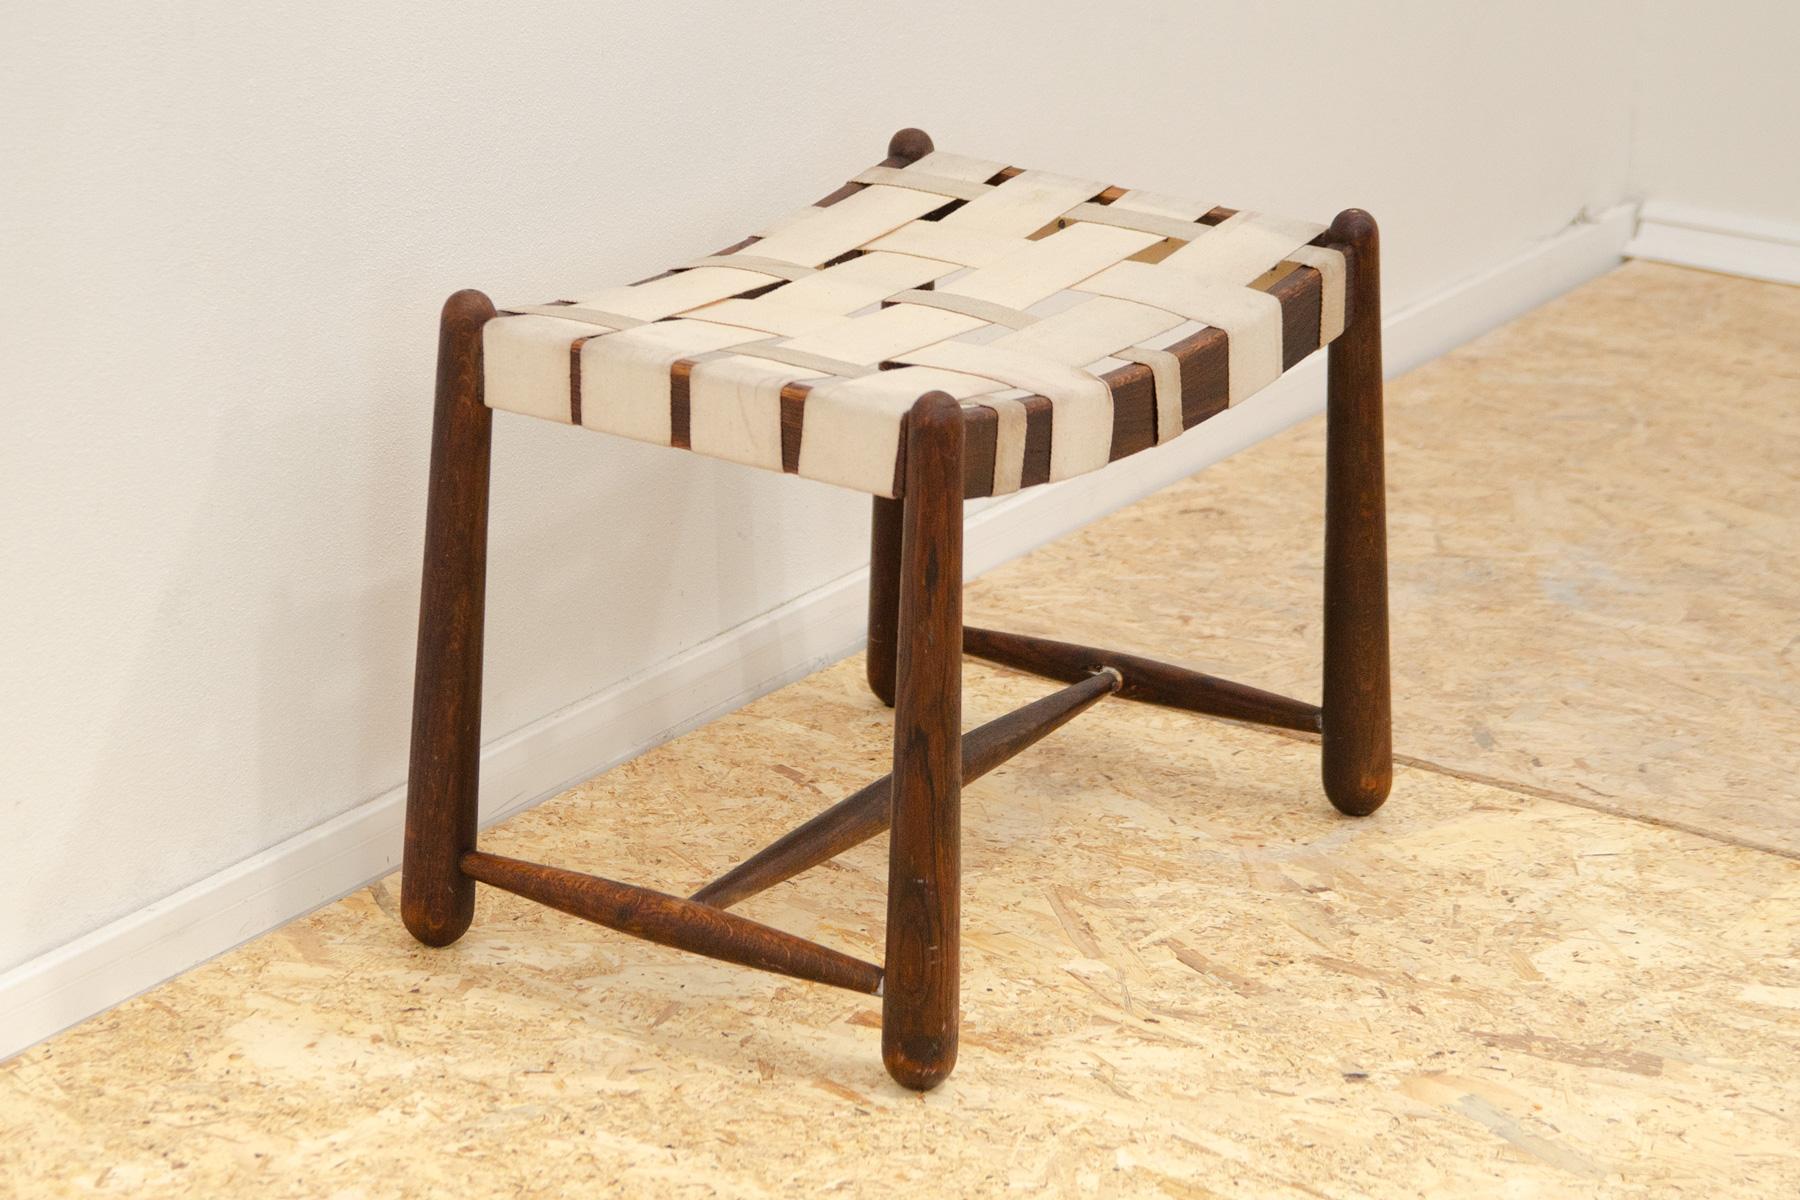 This Vintage stool/footrest was made by Krásná Jizba company in the former Czechoslovakia in the in the 1960´s. They features an unconventional design, irregular shaping. It´s made of beech wood. Wood is in good Vintage condition, showing slight